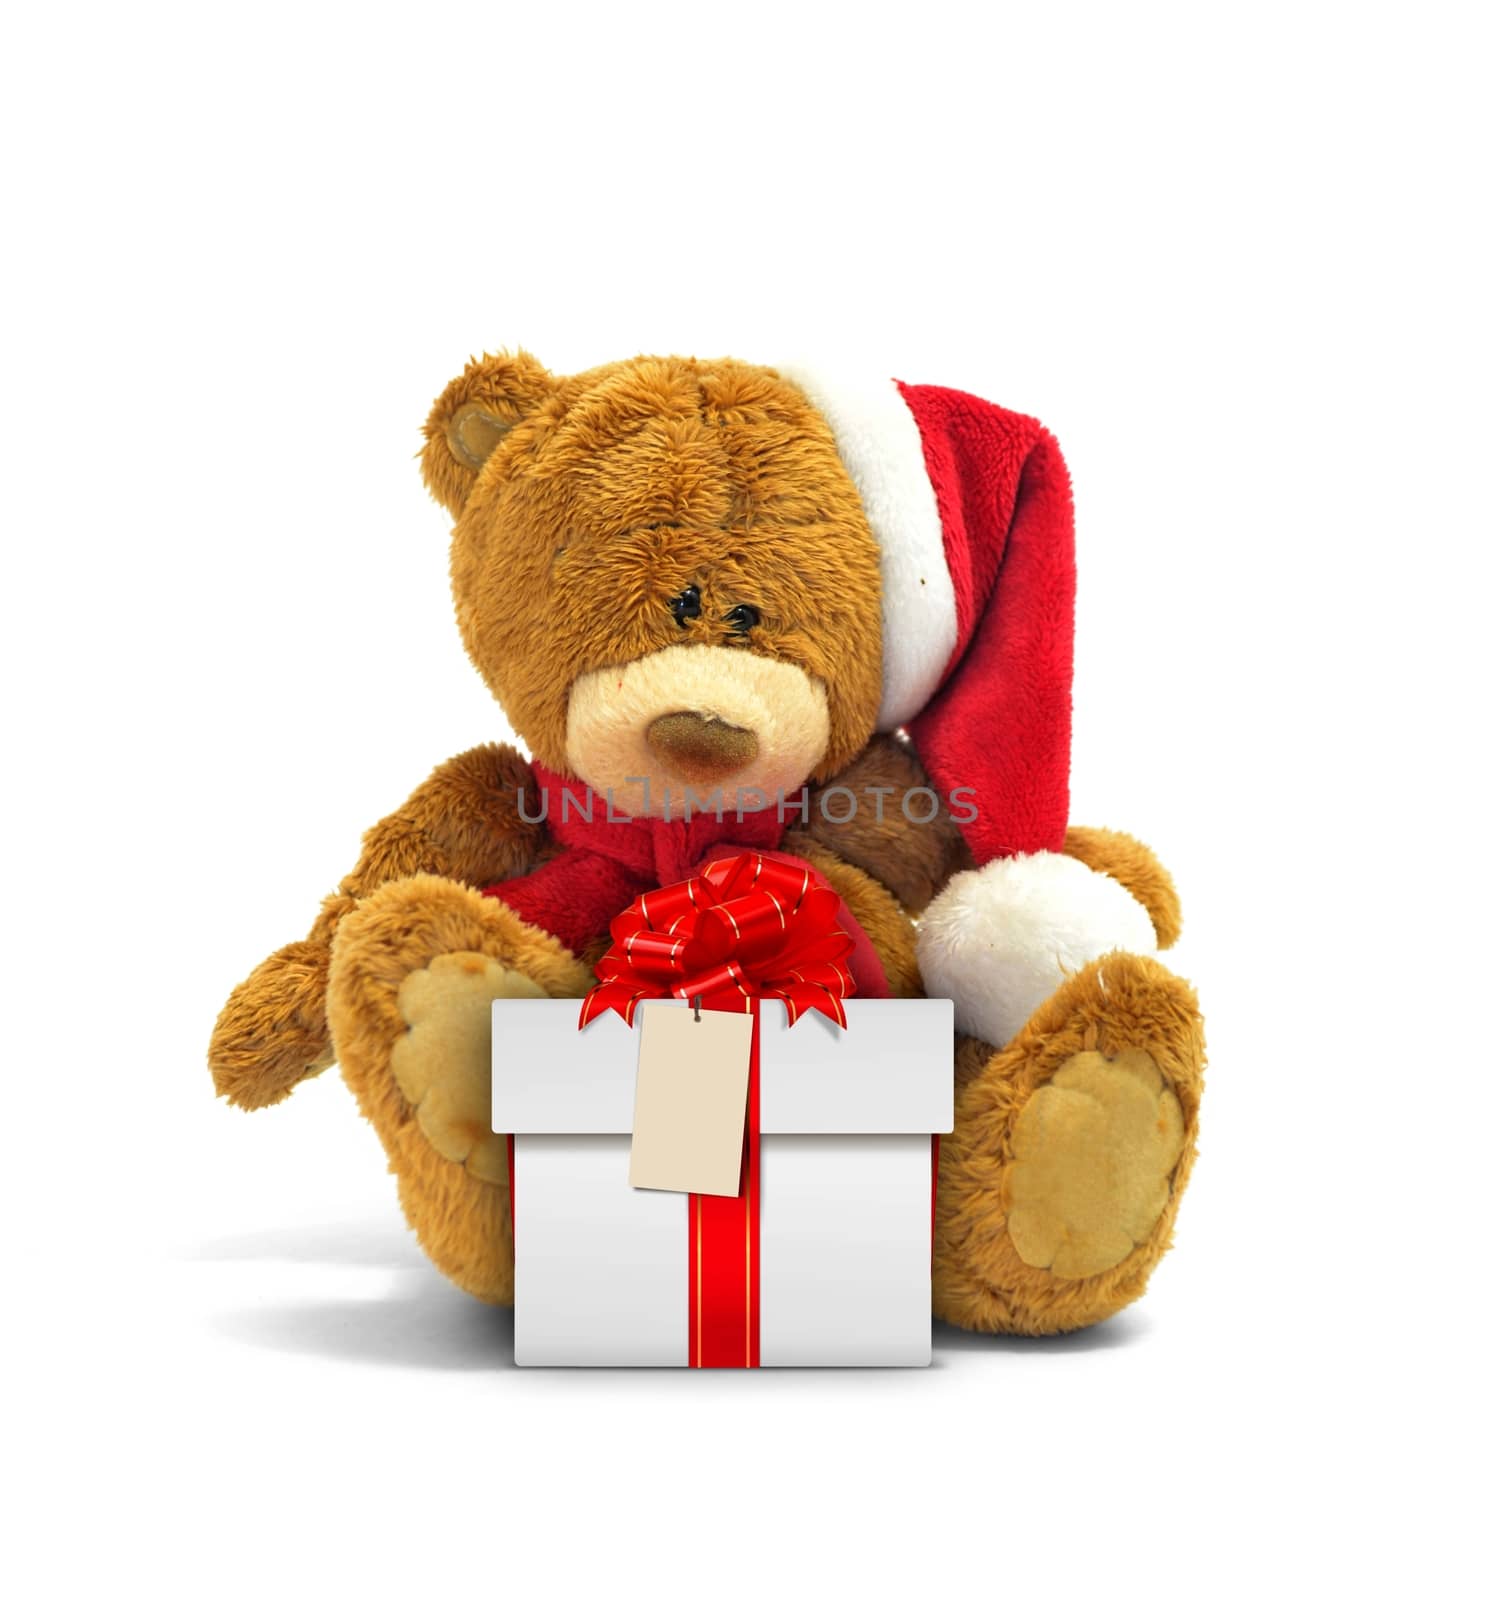 Teddy bear and gift box with red ribbon by razihusin